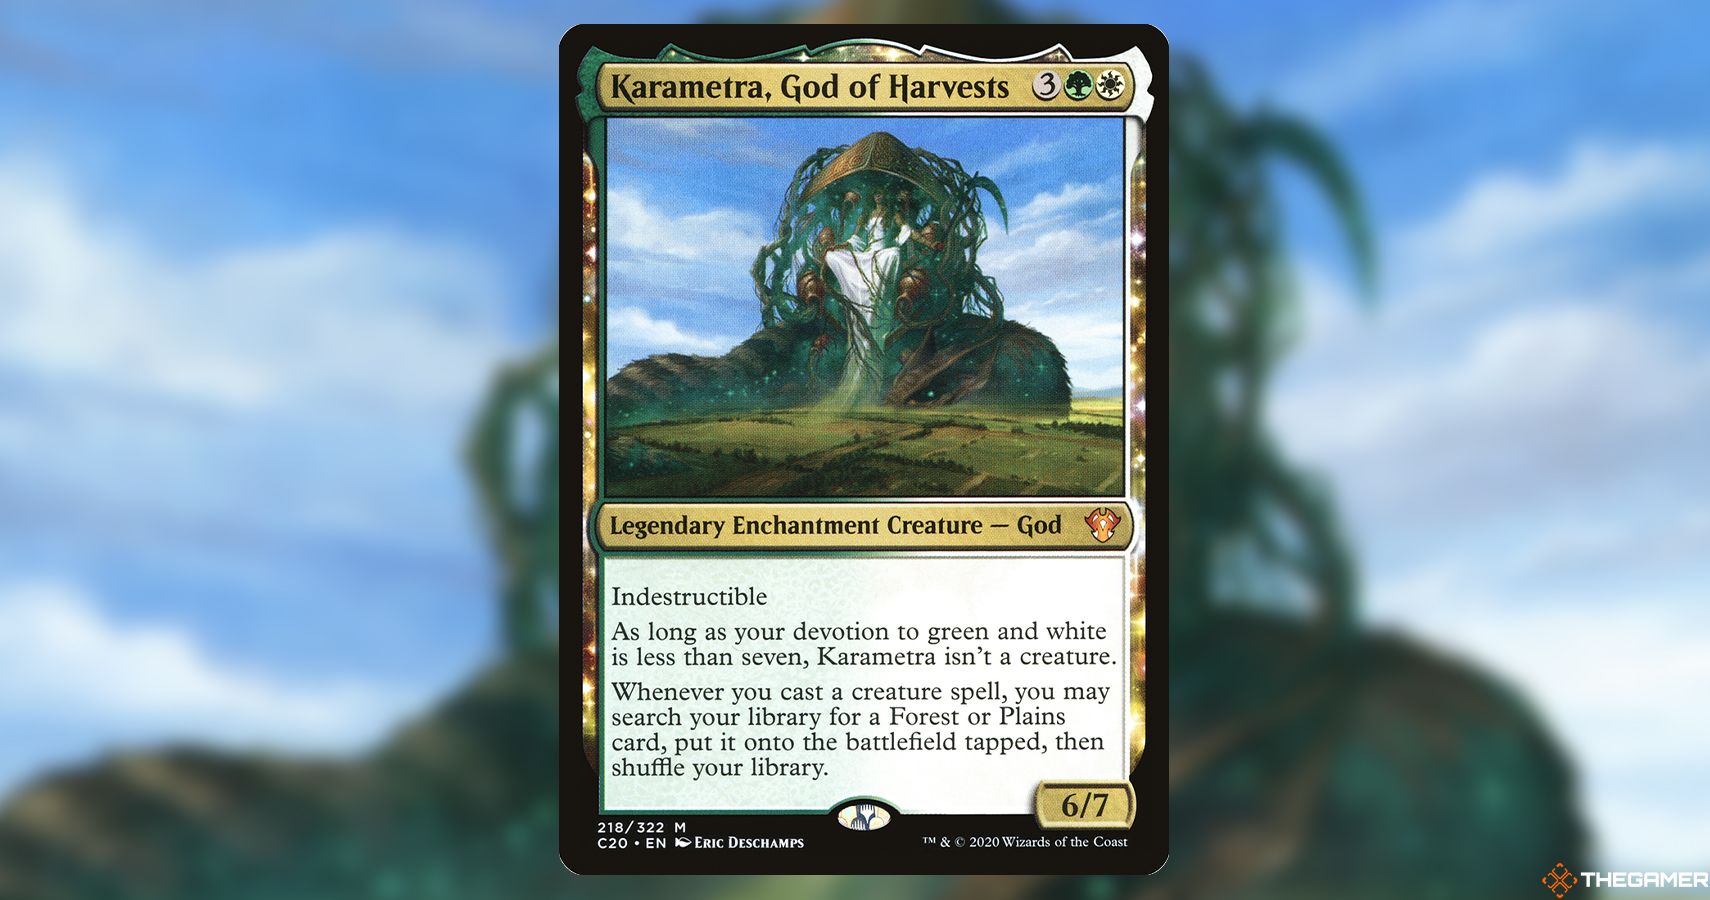 Image of the Karametra, God of Harvests card in Magic: The Gathering, with art by Eric Deschamps